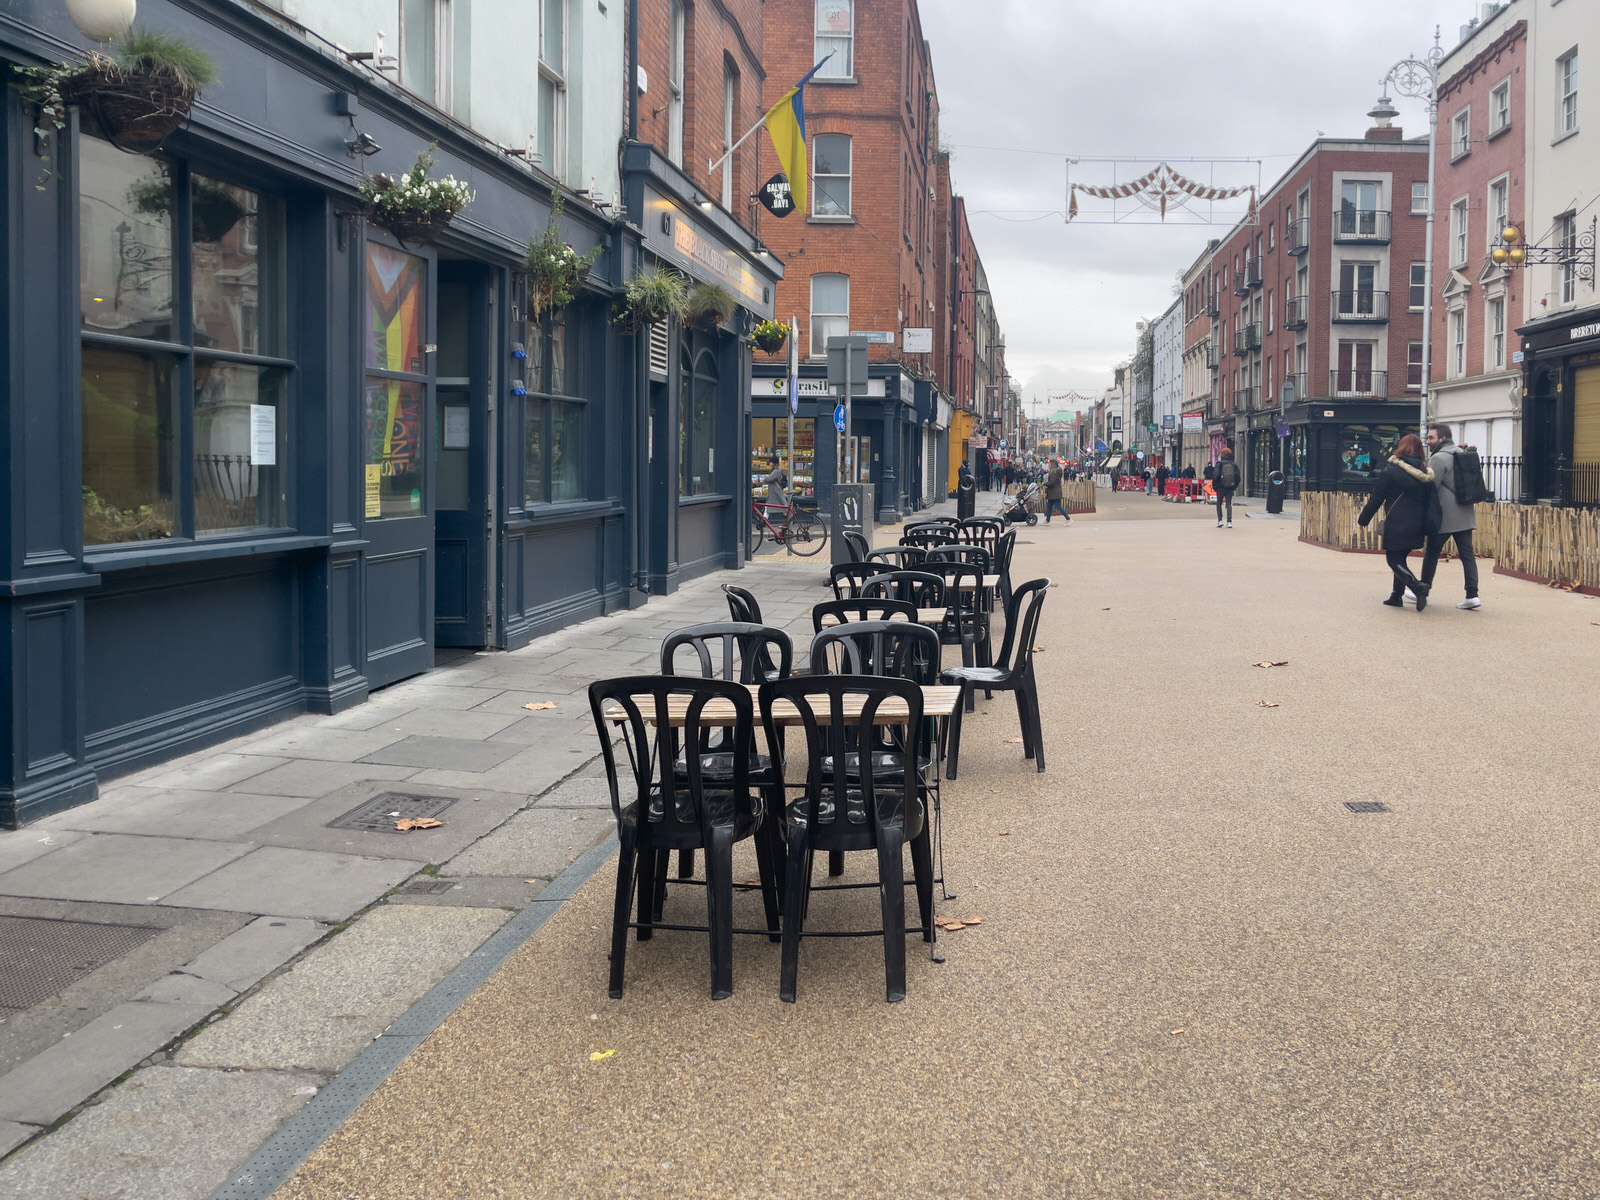 THE NEW STREET FURNITURE IS BEING INSTALLED ON CAPEL STREET [BUT THERE ARE FEW VISITORS TO BE SEEN TODAY] 002